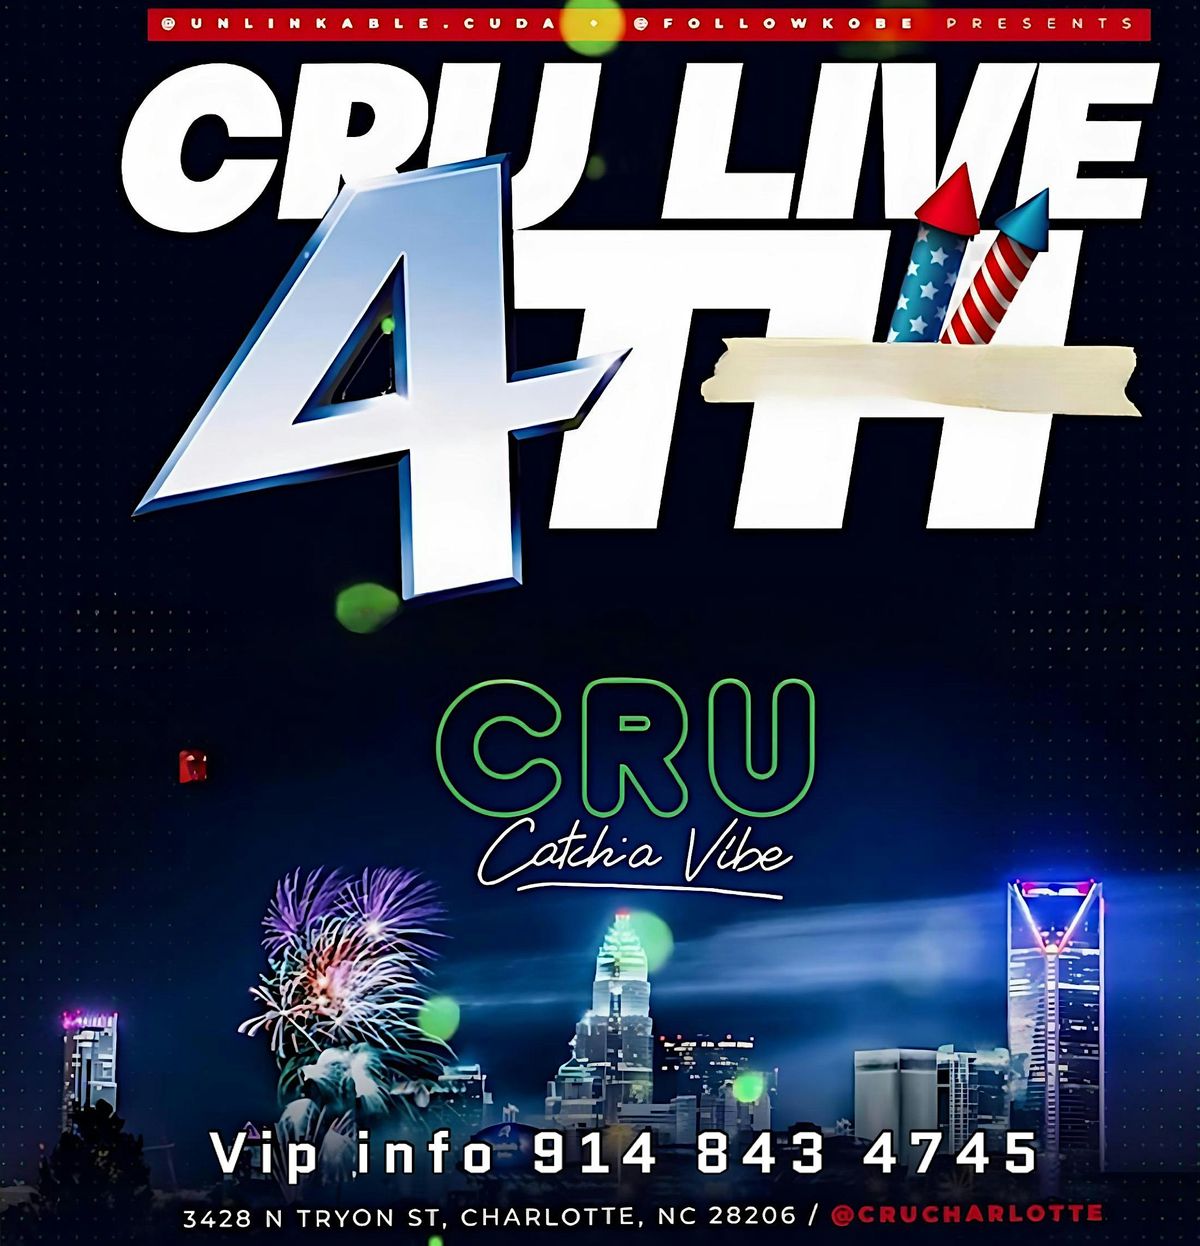 Cru live on the 4th! $300 2 bottles!